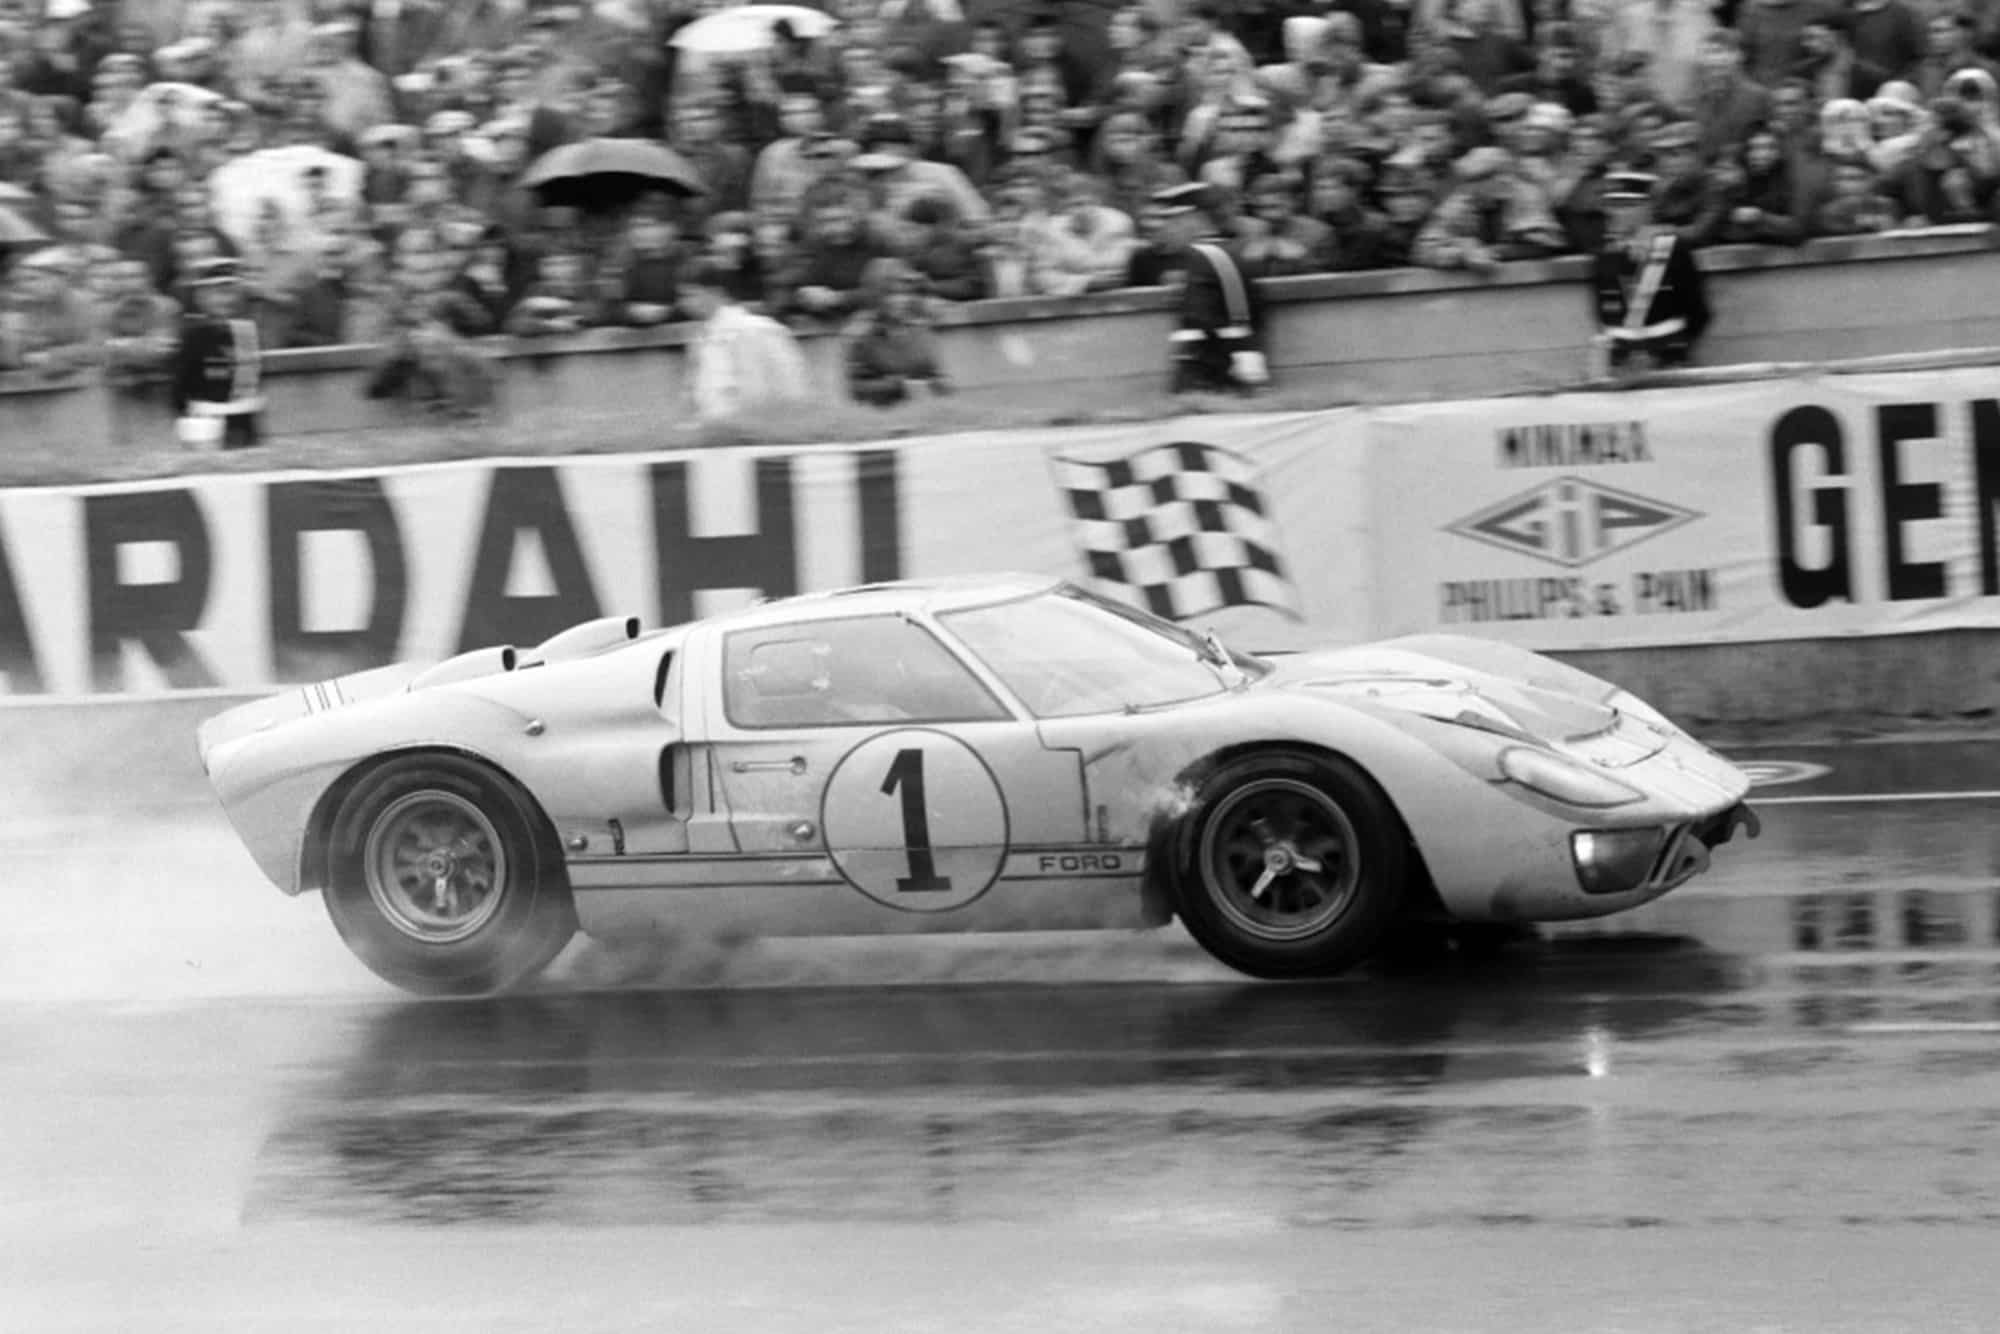 Ken Miles and Denny Hulme's Ford GT40 Mk II during the 1966 Le Mans 24 Hours